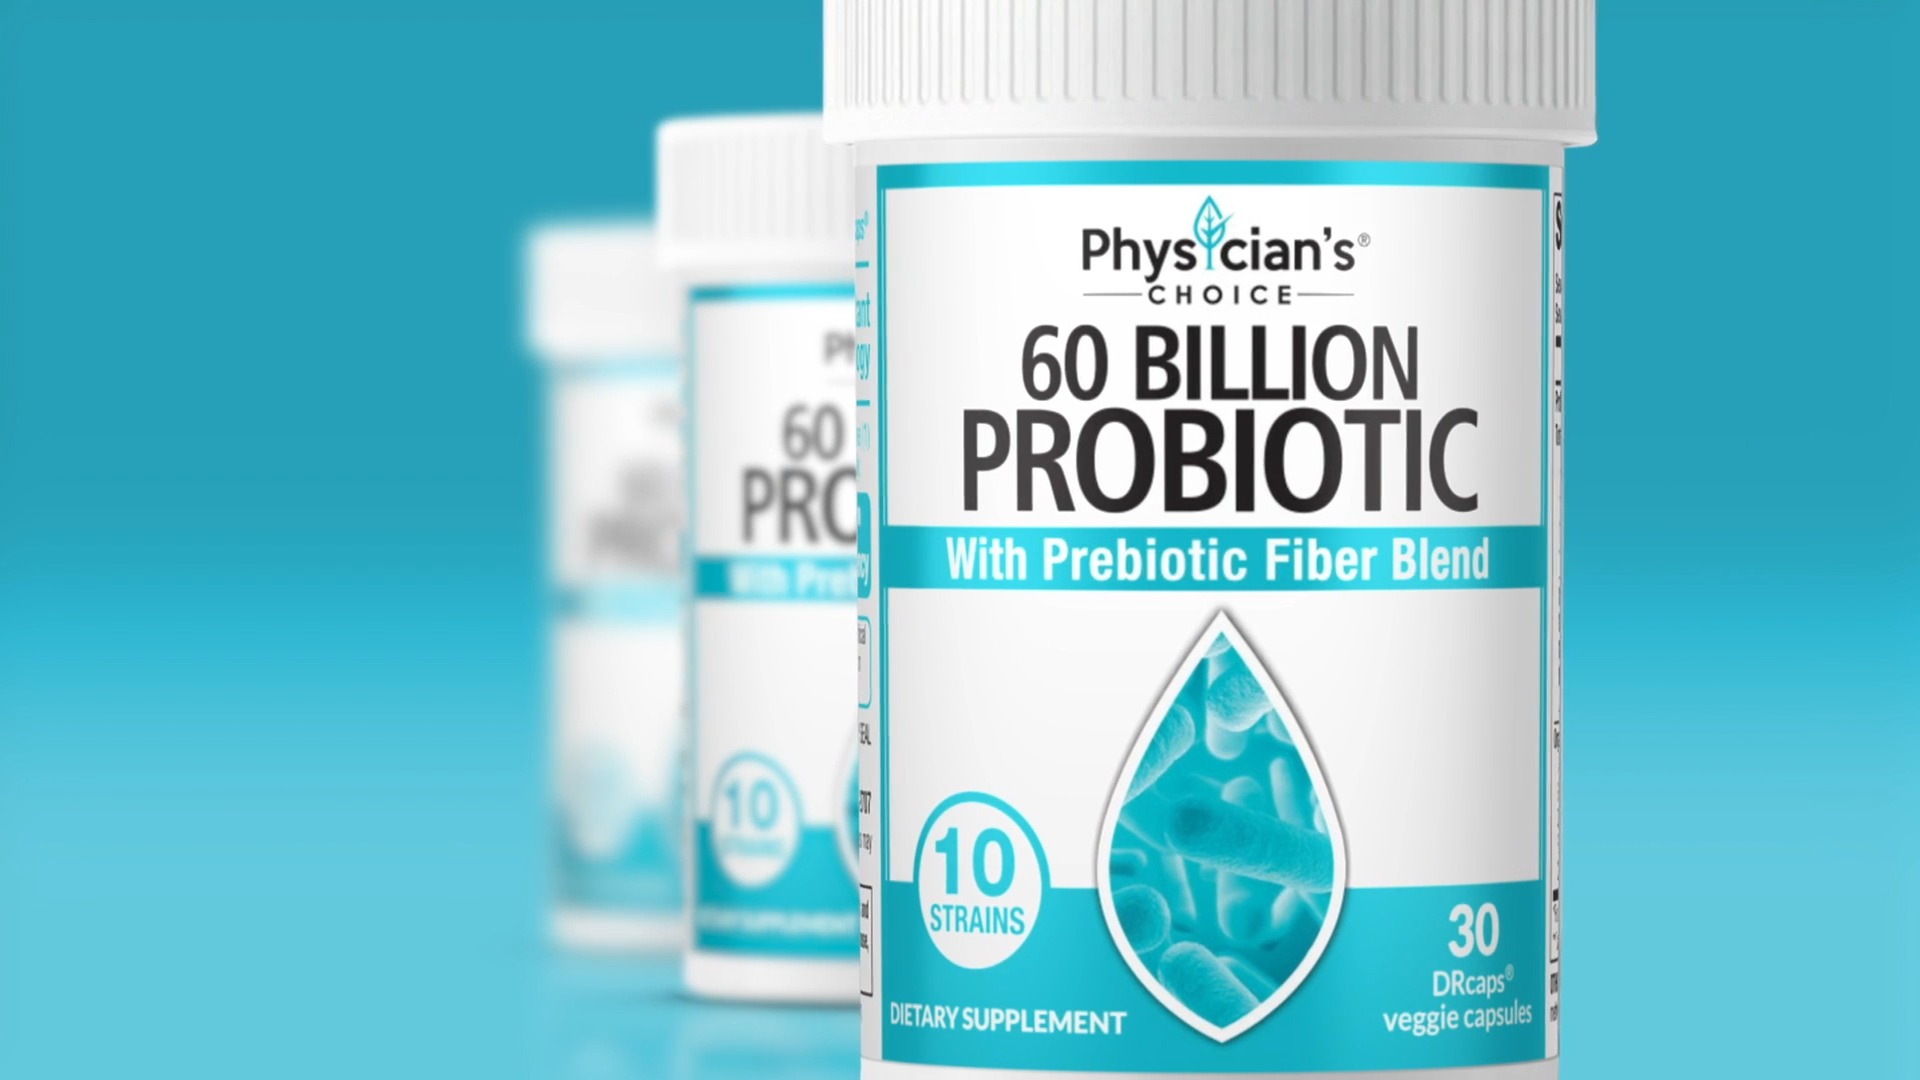 Physician's Choice 60 Billion Probiotic Product Overview